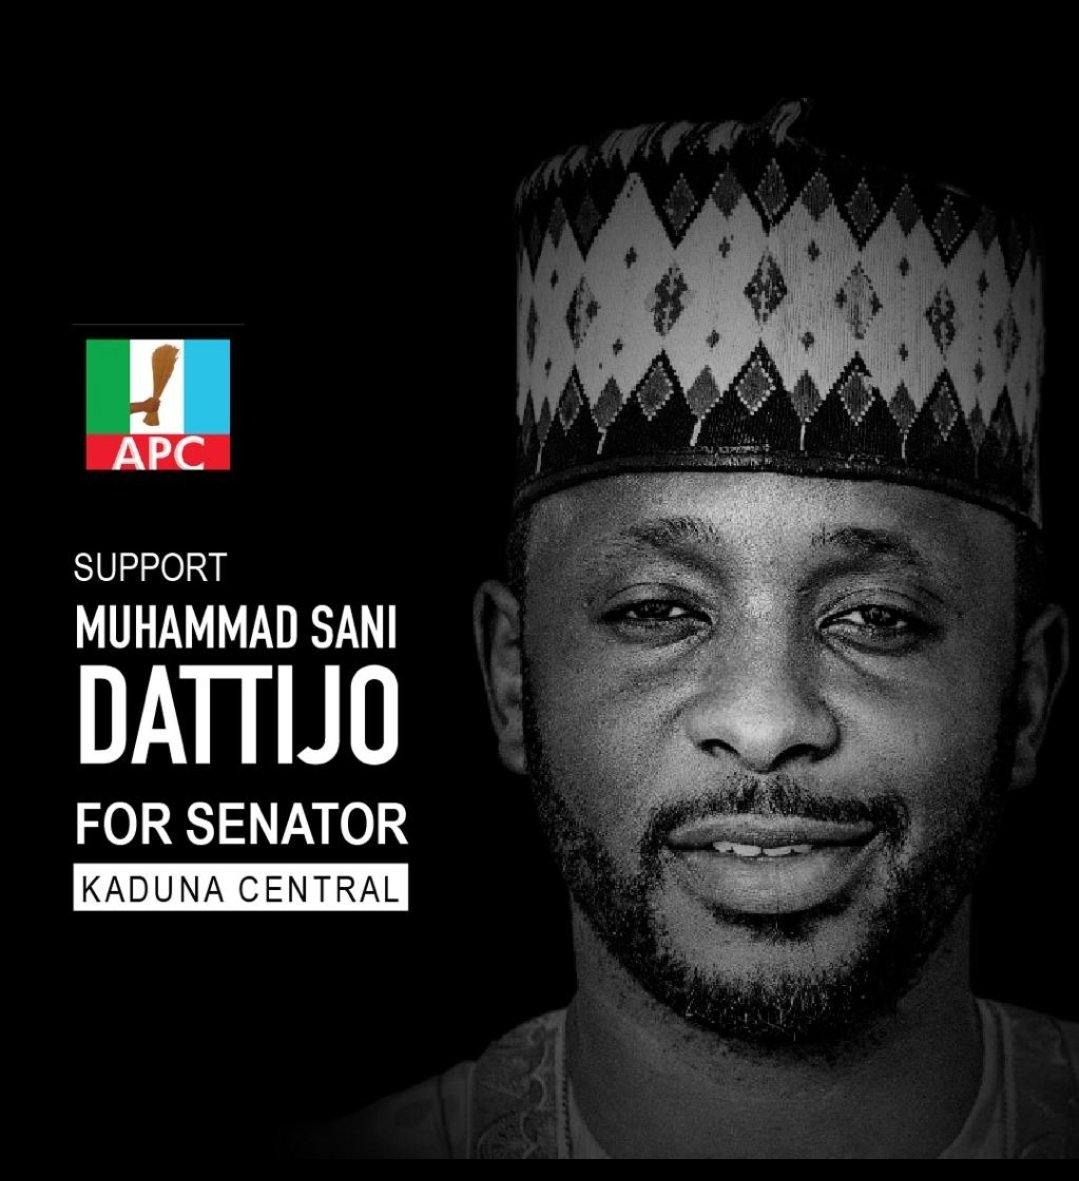 Muh D Sani Dattijo Thankful For All The Overwhelming Support Solidarity And Prayers In The Last Few Weeks We Plan And God Plans And His Plans Are Always The Best As